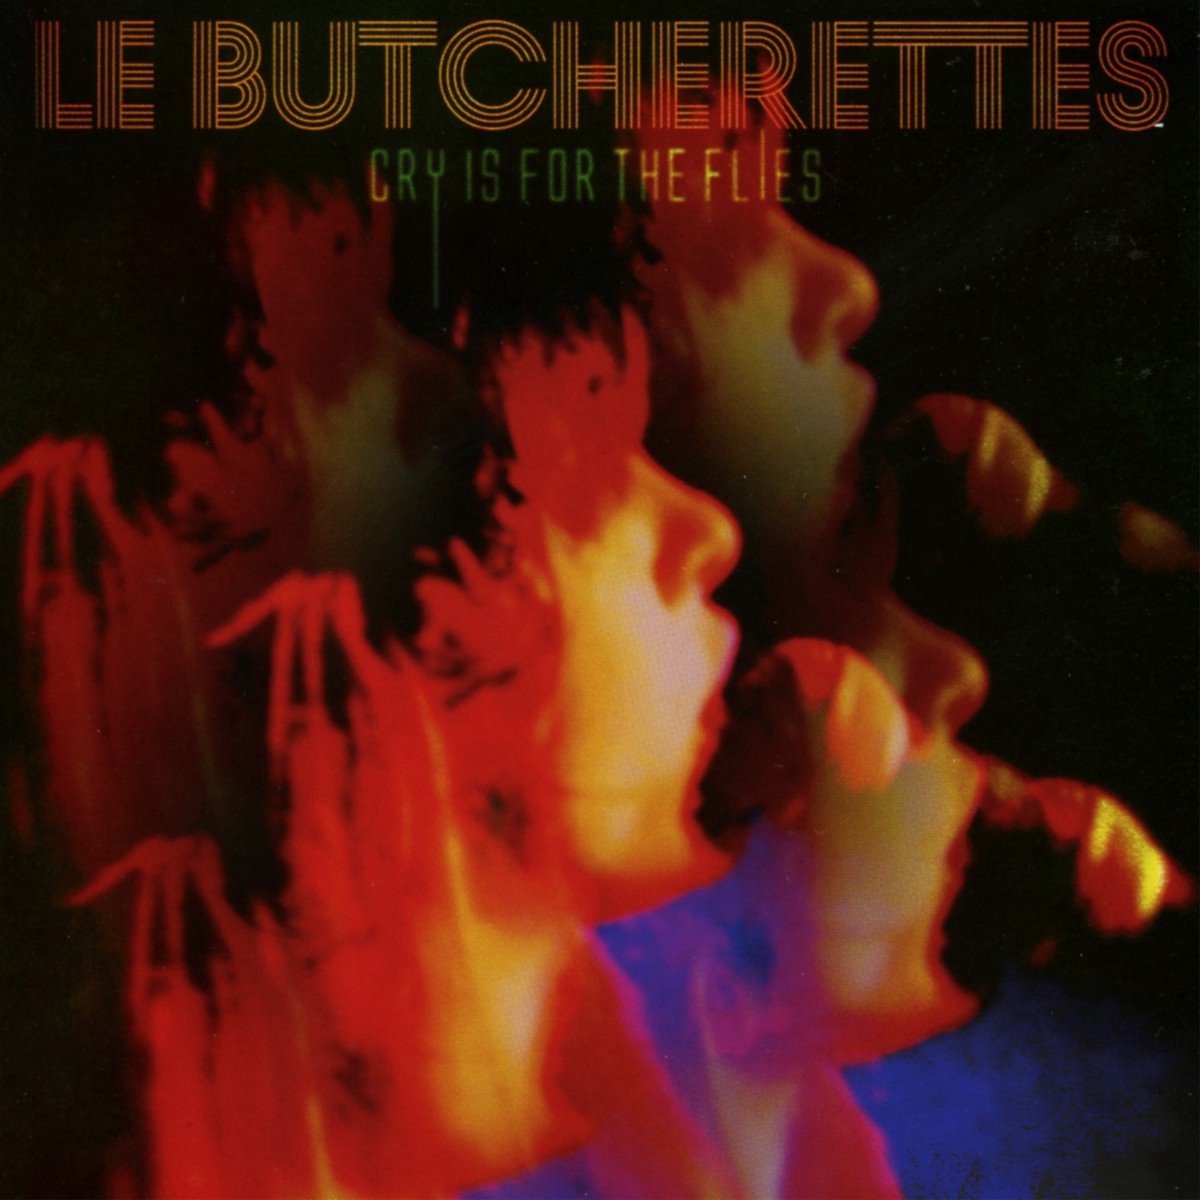 Le Butcherettes - Cry Is For The Flies (CD)